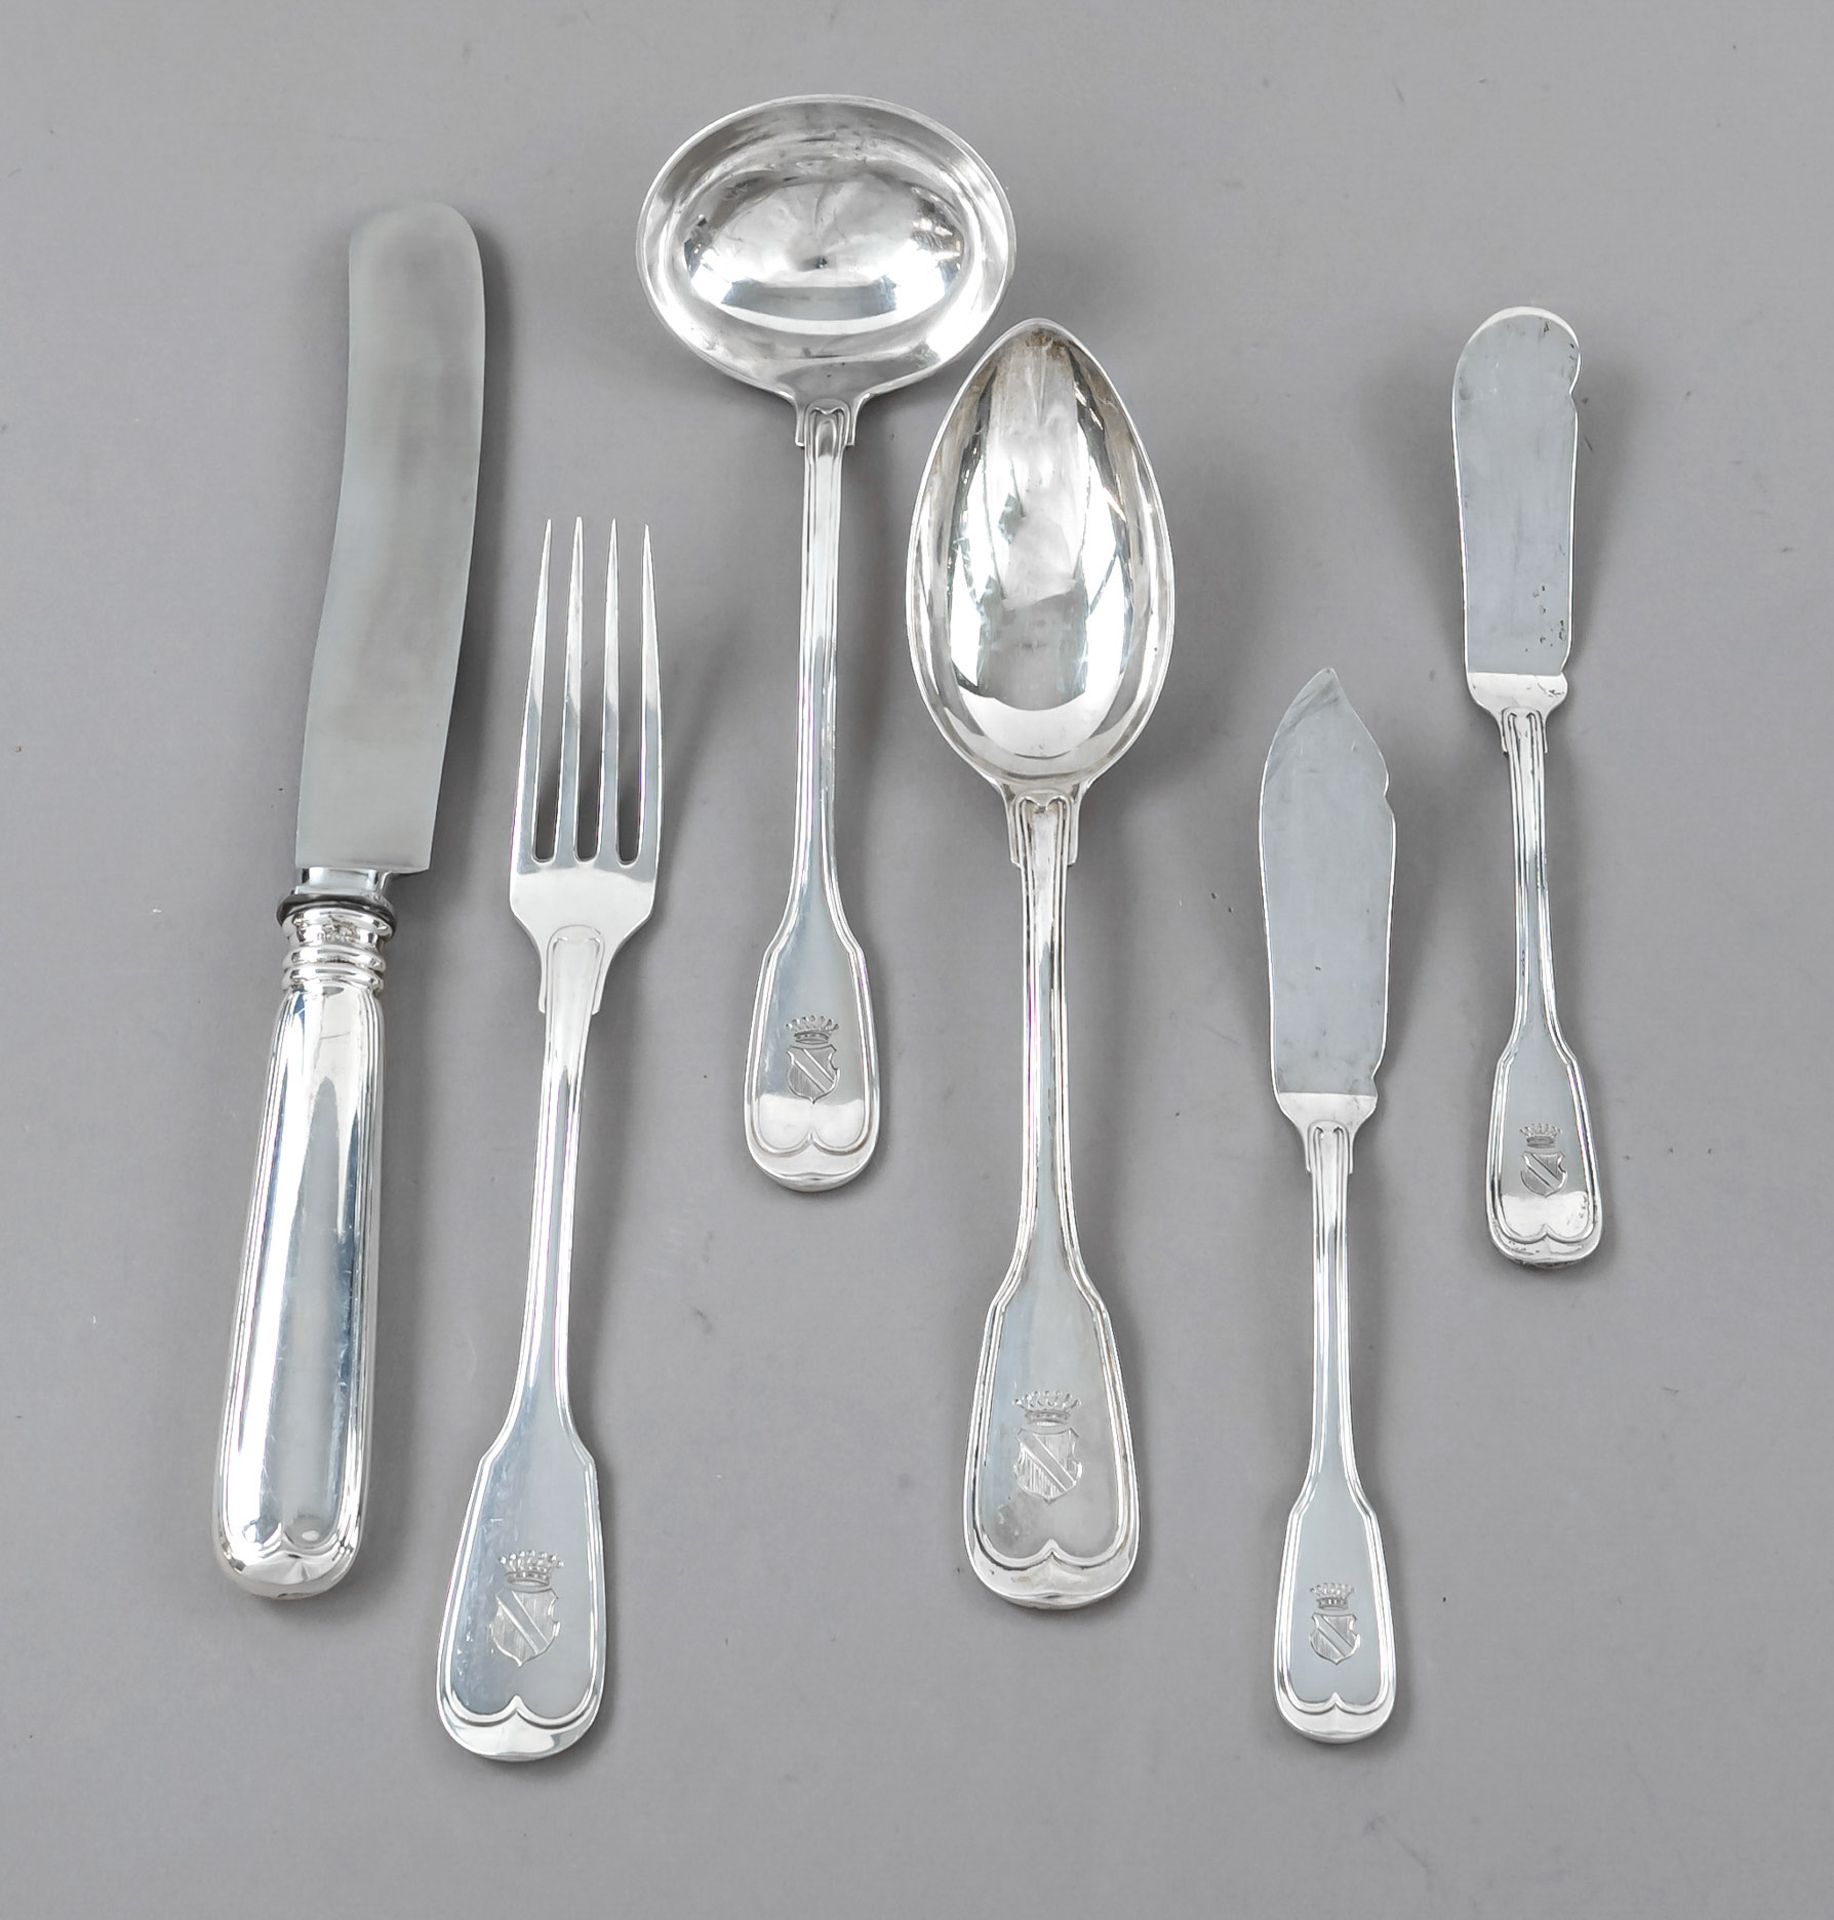 21-piece dinner set for 6 persons, German, 20th century, maker's mark M. H. Wilkens & Söhne,